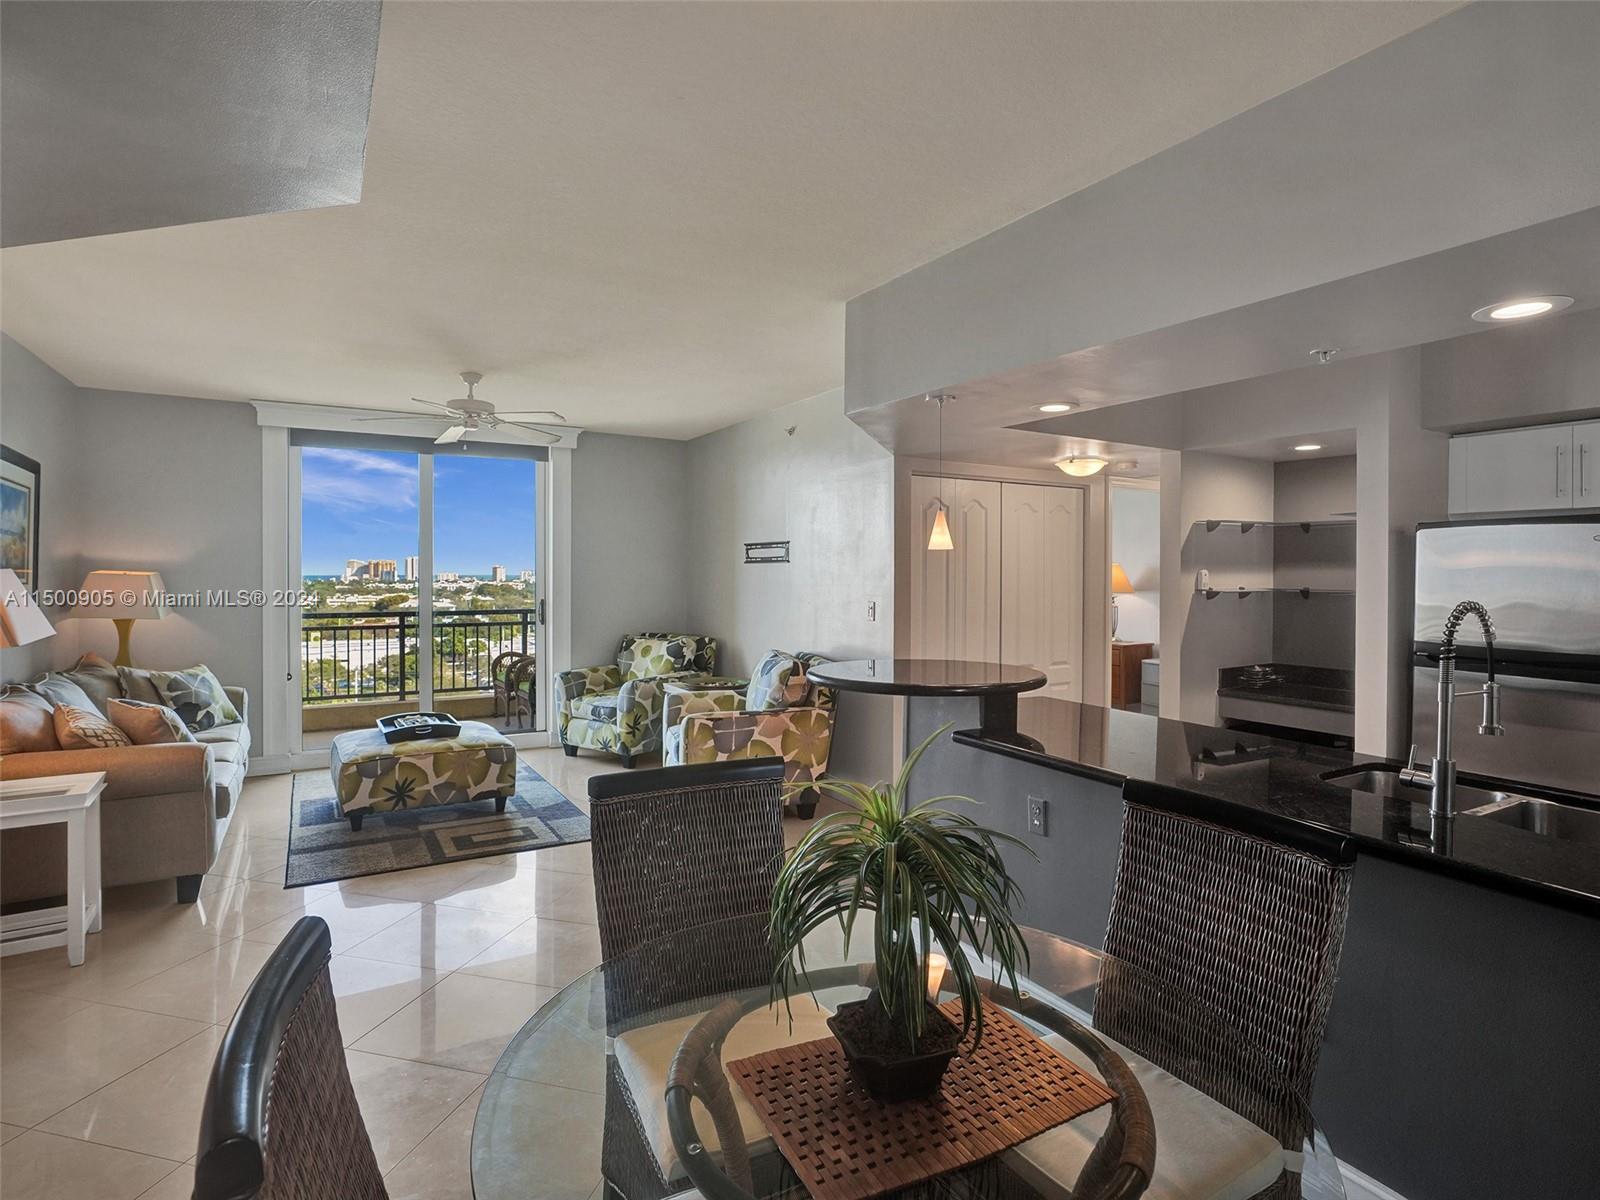 Motivated seller. Stunning sub-penthouse in downtown Fort Lauderdale with direct East side ocean view. This 2/2, split bedroom residence boasts custom-made closets, open concept kitchen, full-size washer/dryer, porcelain tile throughout, and impact windows. Breathtaking views of the ocean and city skyline from the spacious balcony. Resort-style amenities include an infinity pool, jacuzzi, cabanas, and barbecue grills.  Renovated lobby, elevators, community room, and pool deck add a touch of modern luxury to the building. Prime location within walking distance to Las Olas, shops, restaurants. Just 2 miles from the ocean, a few minutes Riverfront, FLL airport and quick access to the Brightline train. Pets OK. You can rent right of way. 2 assigned parking  valet available